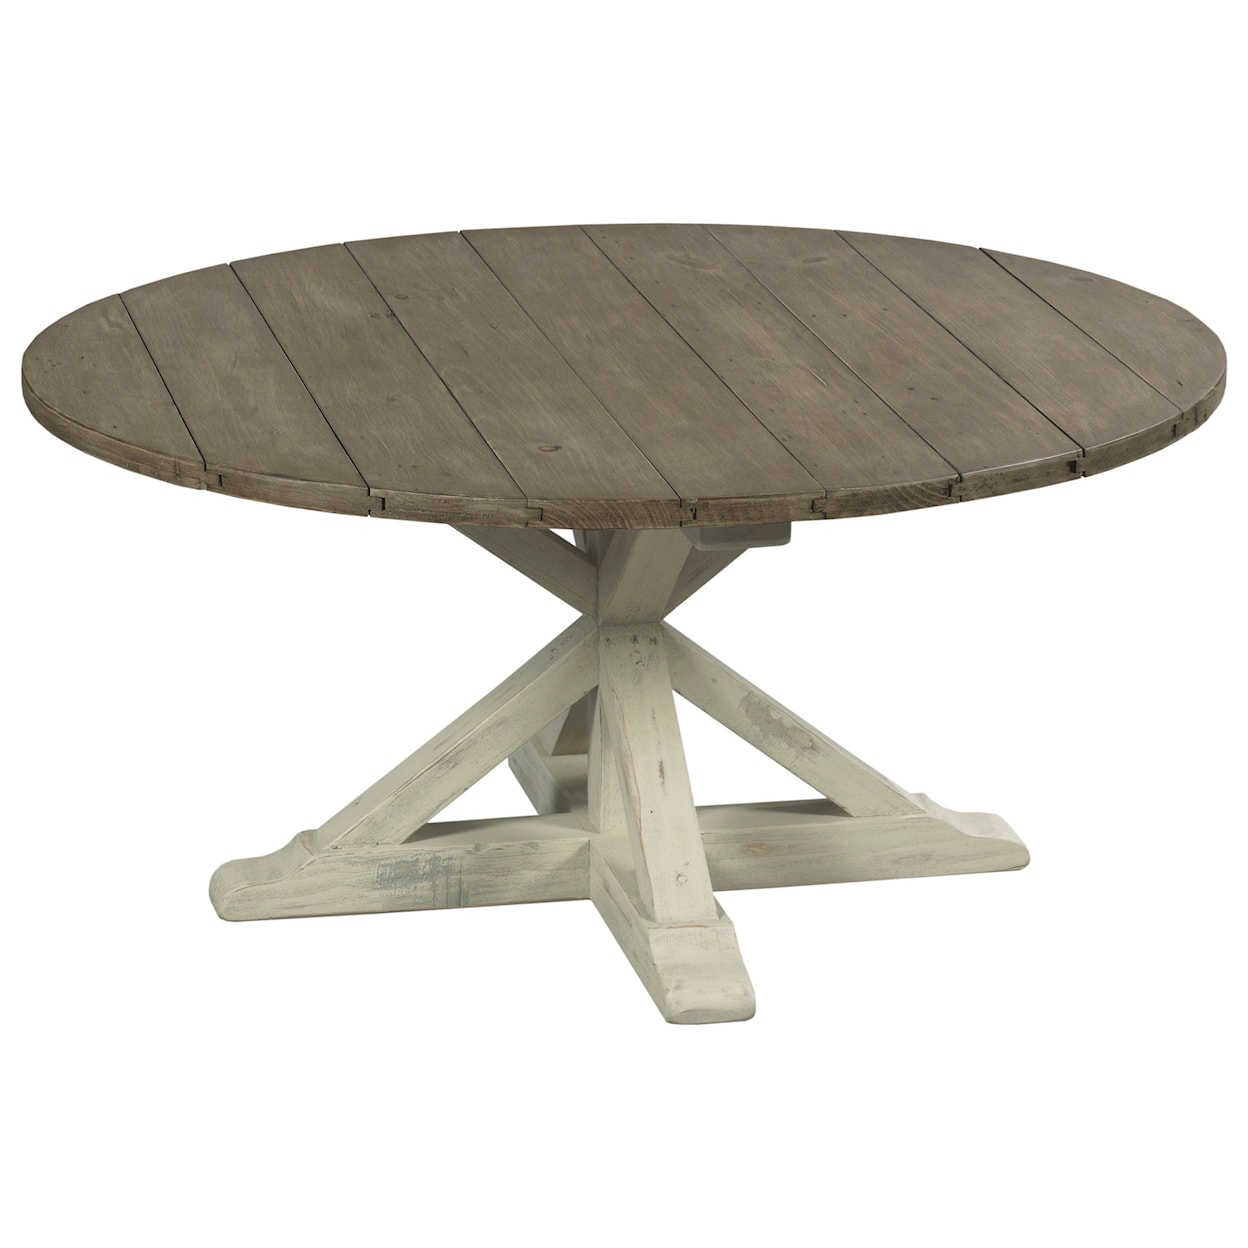 Hammary Reclamation Place Trestle Round Cocktail Table